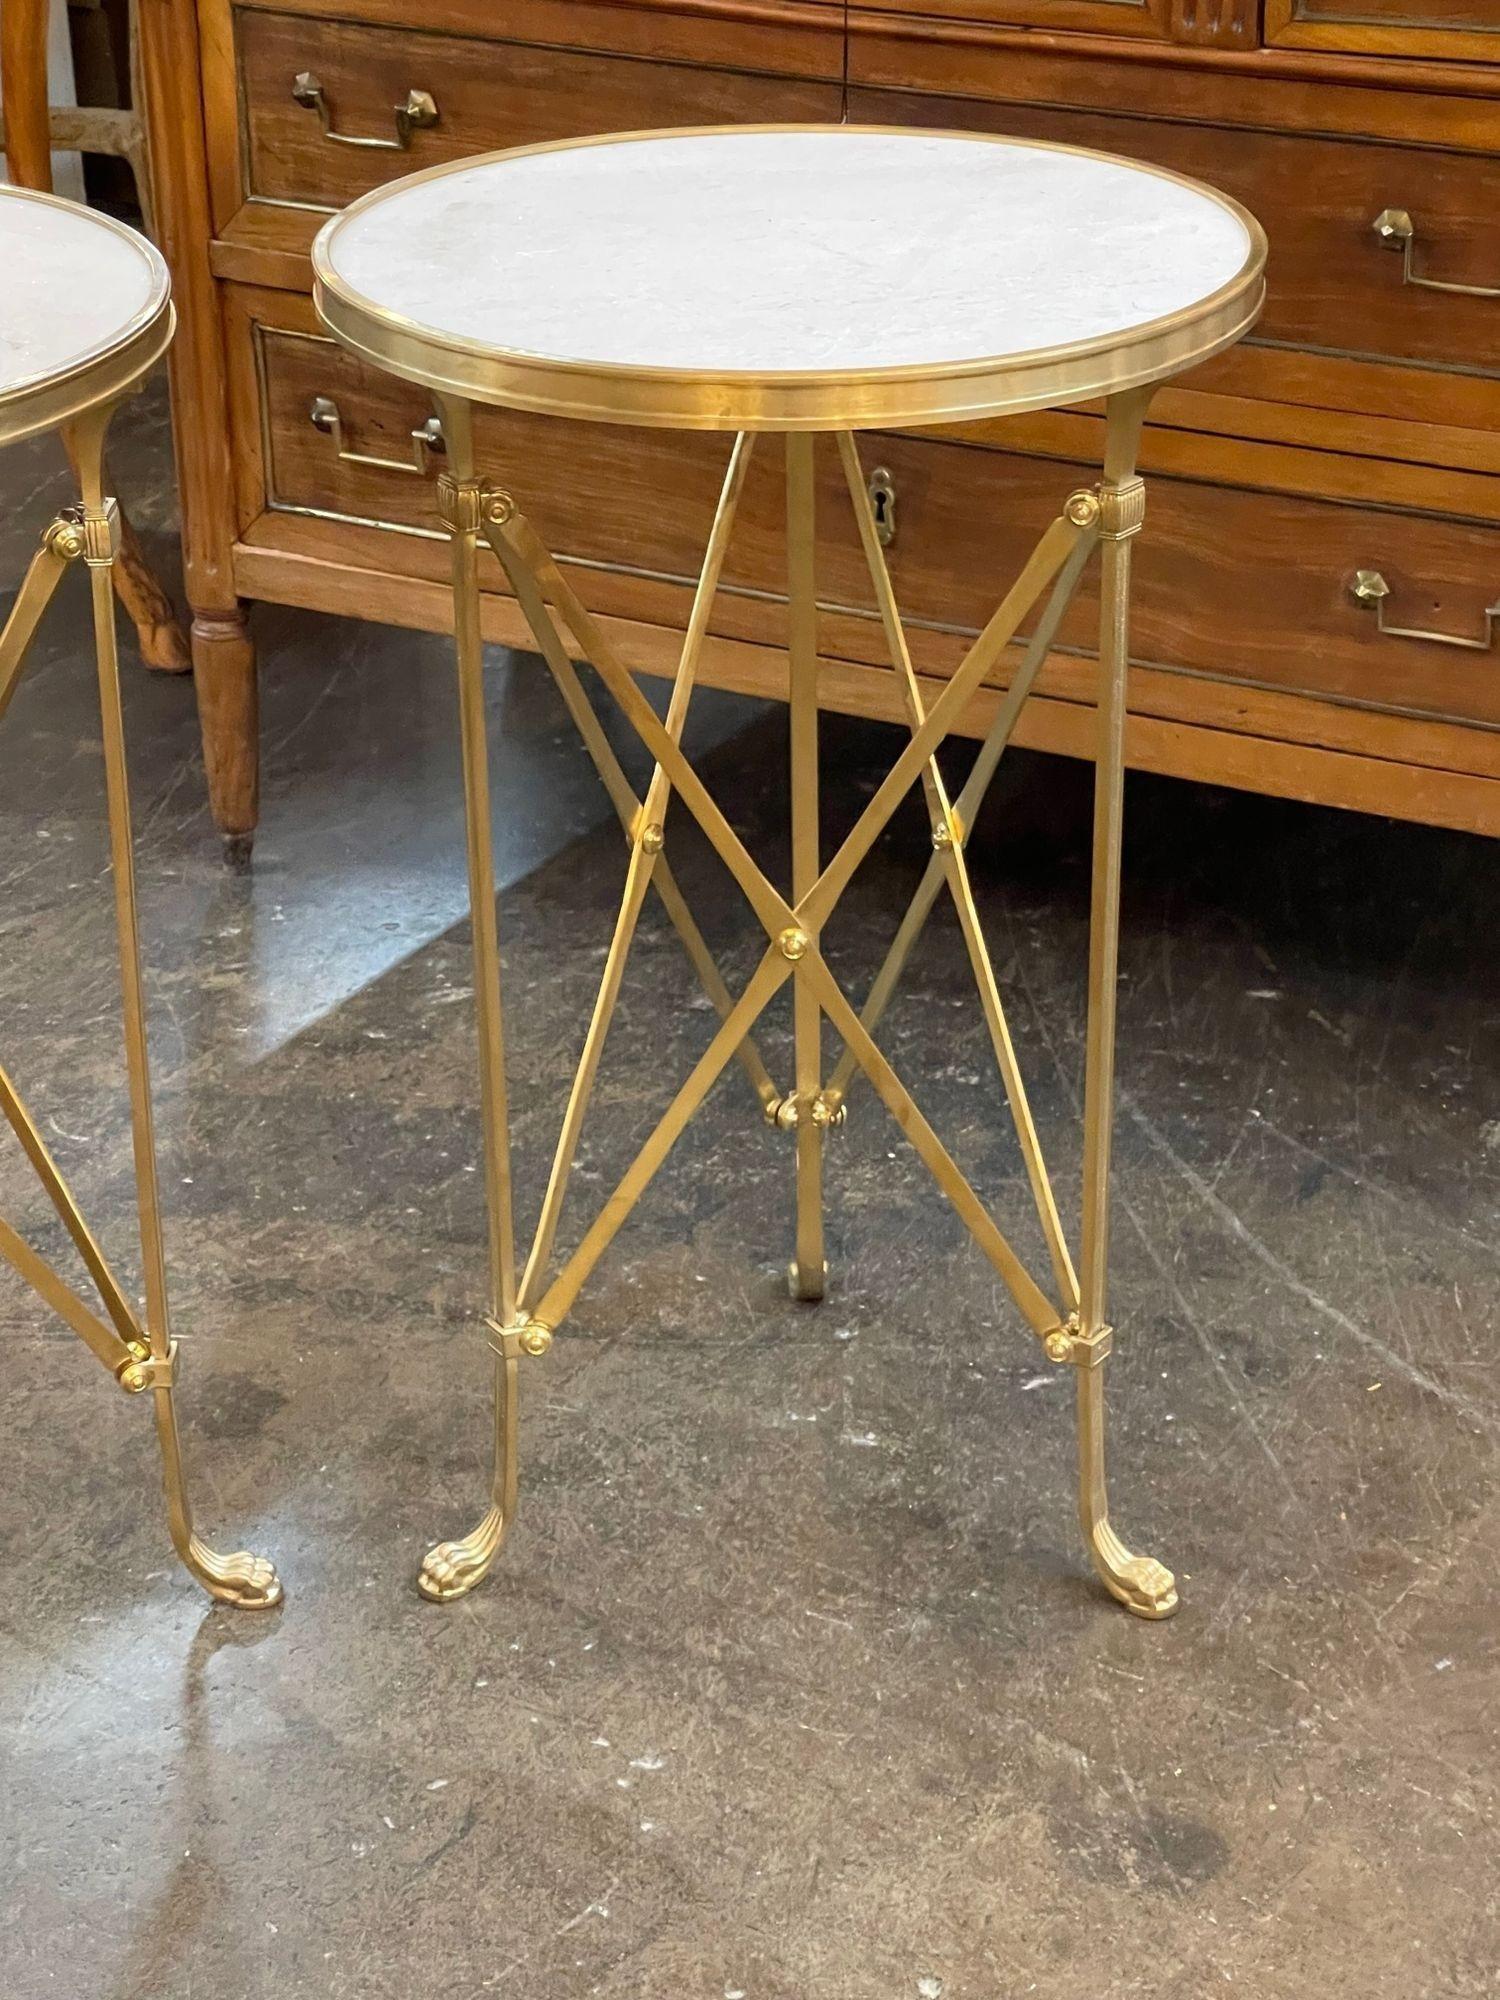 Beautiful pair of French Directoire style gilt bronze and marble side tables. These tables are extremely fine quality and a gorgeous finish. Creates a very polished look!.